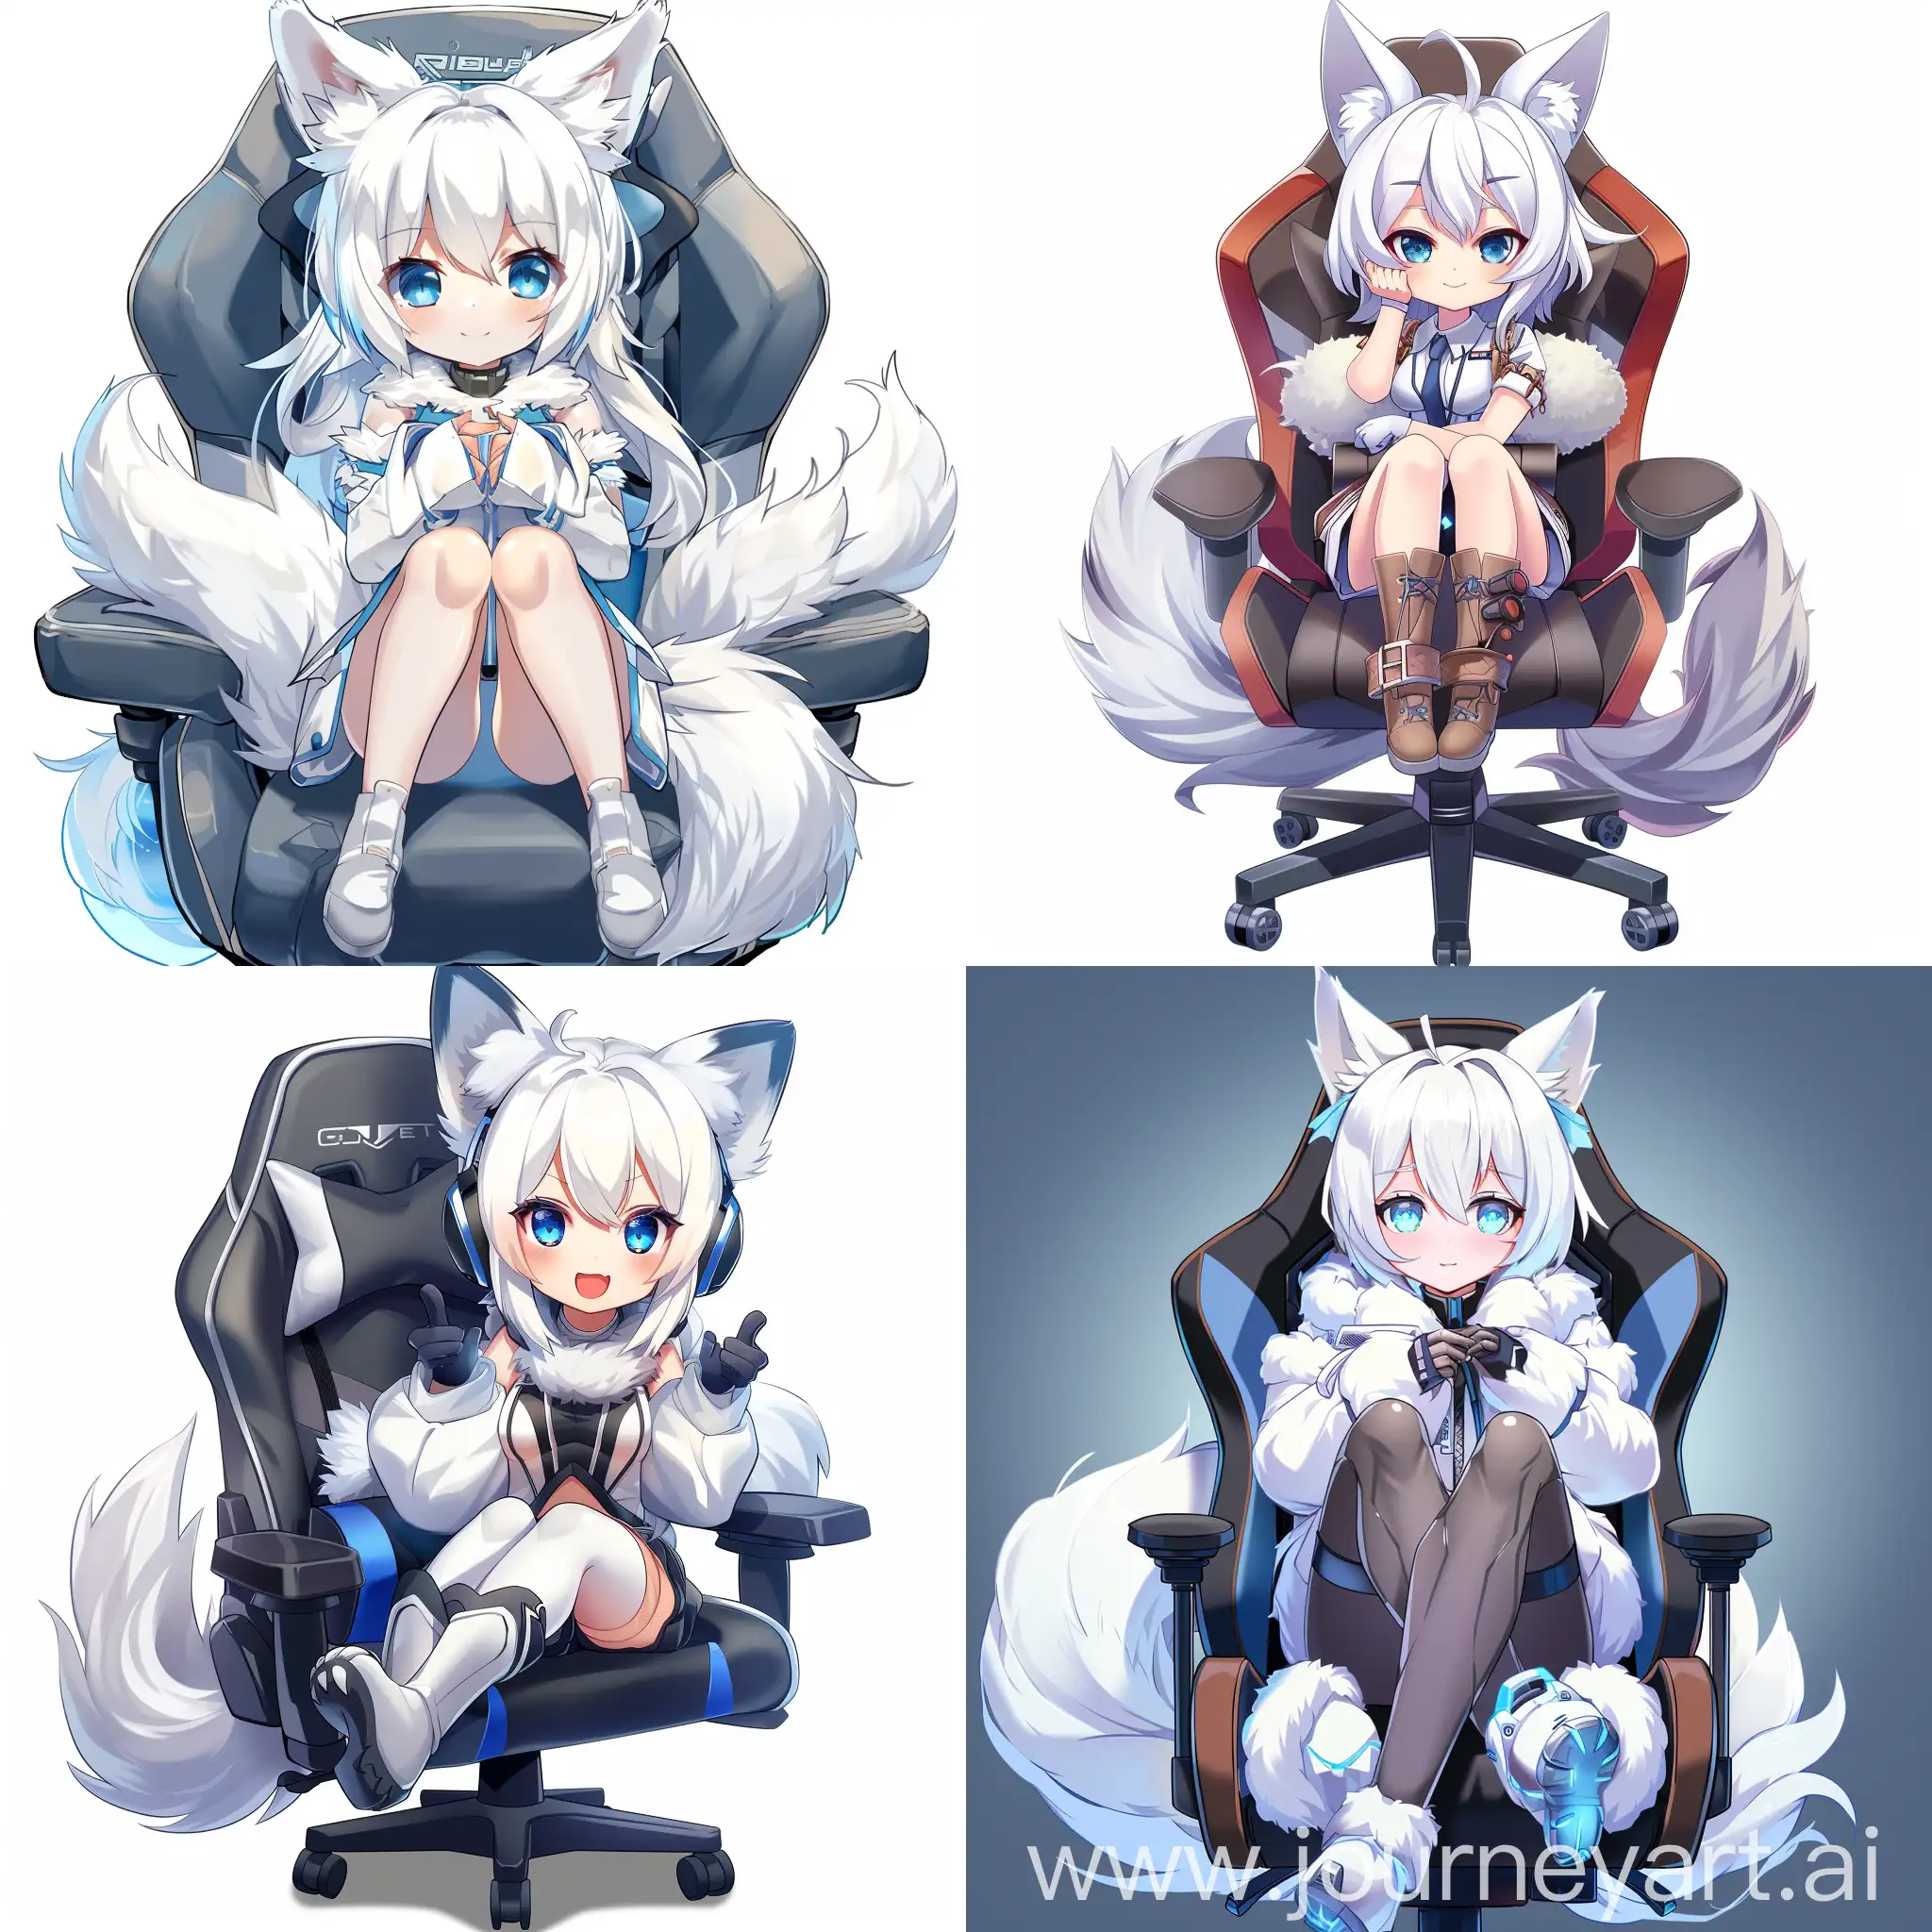 Cute-Anime-VTuber-Girl-with-White-Hair-and-Blue-Eyes-Sitting-on-Gaming-Chair